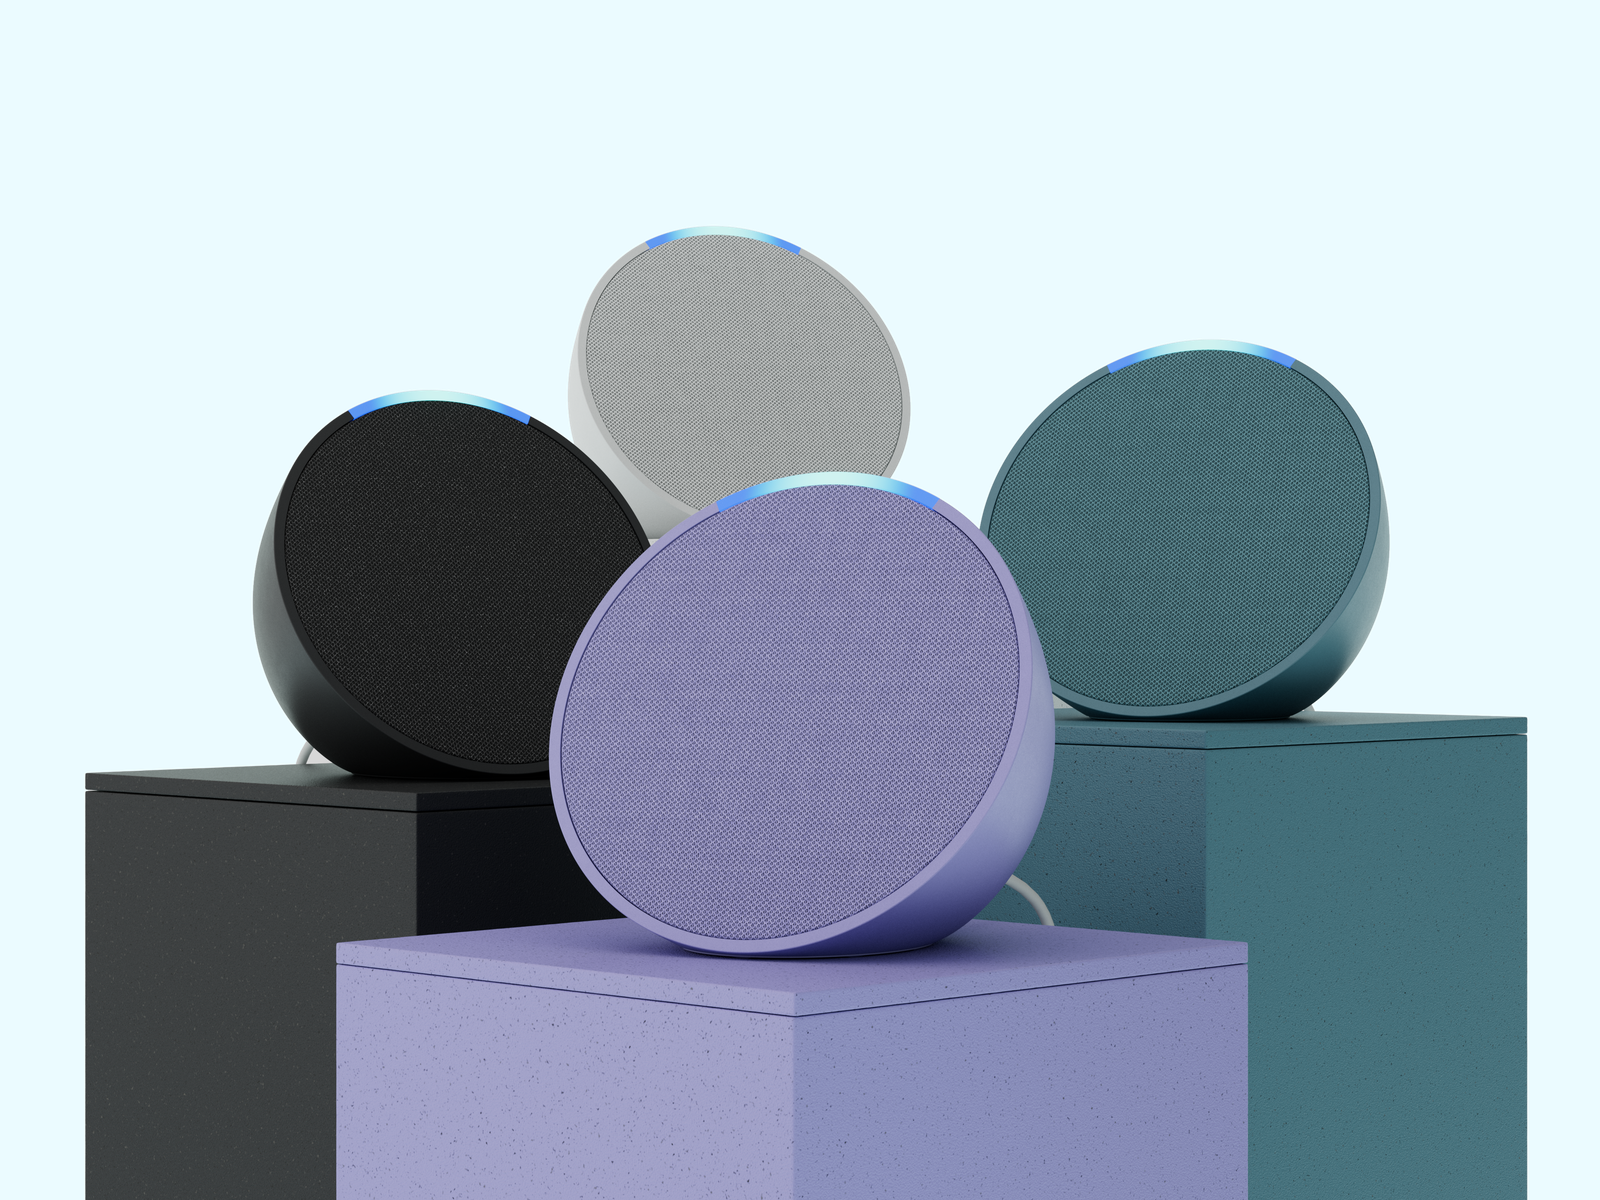 Group shot of four round Amazon Echo Pop speakers, each sitting on a colour matched pedestal